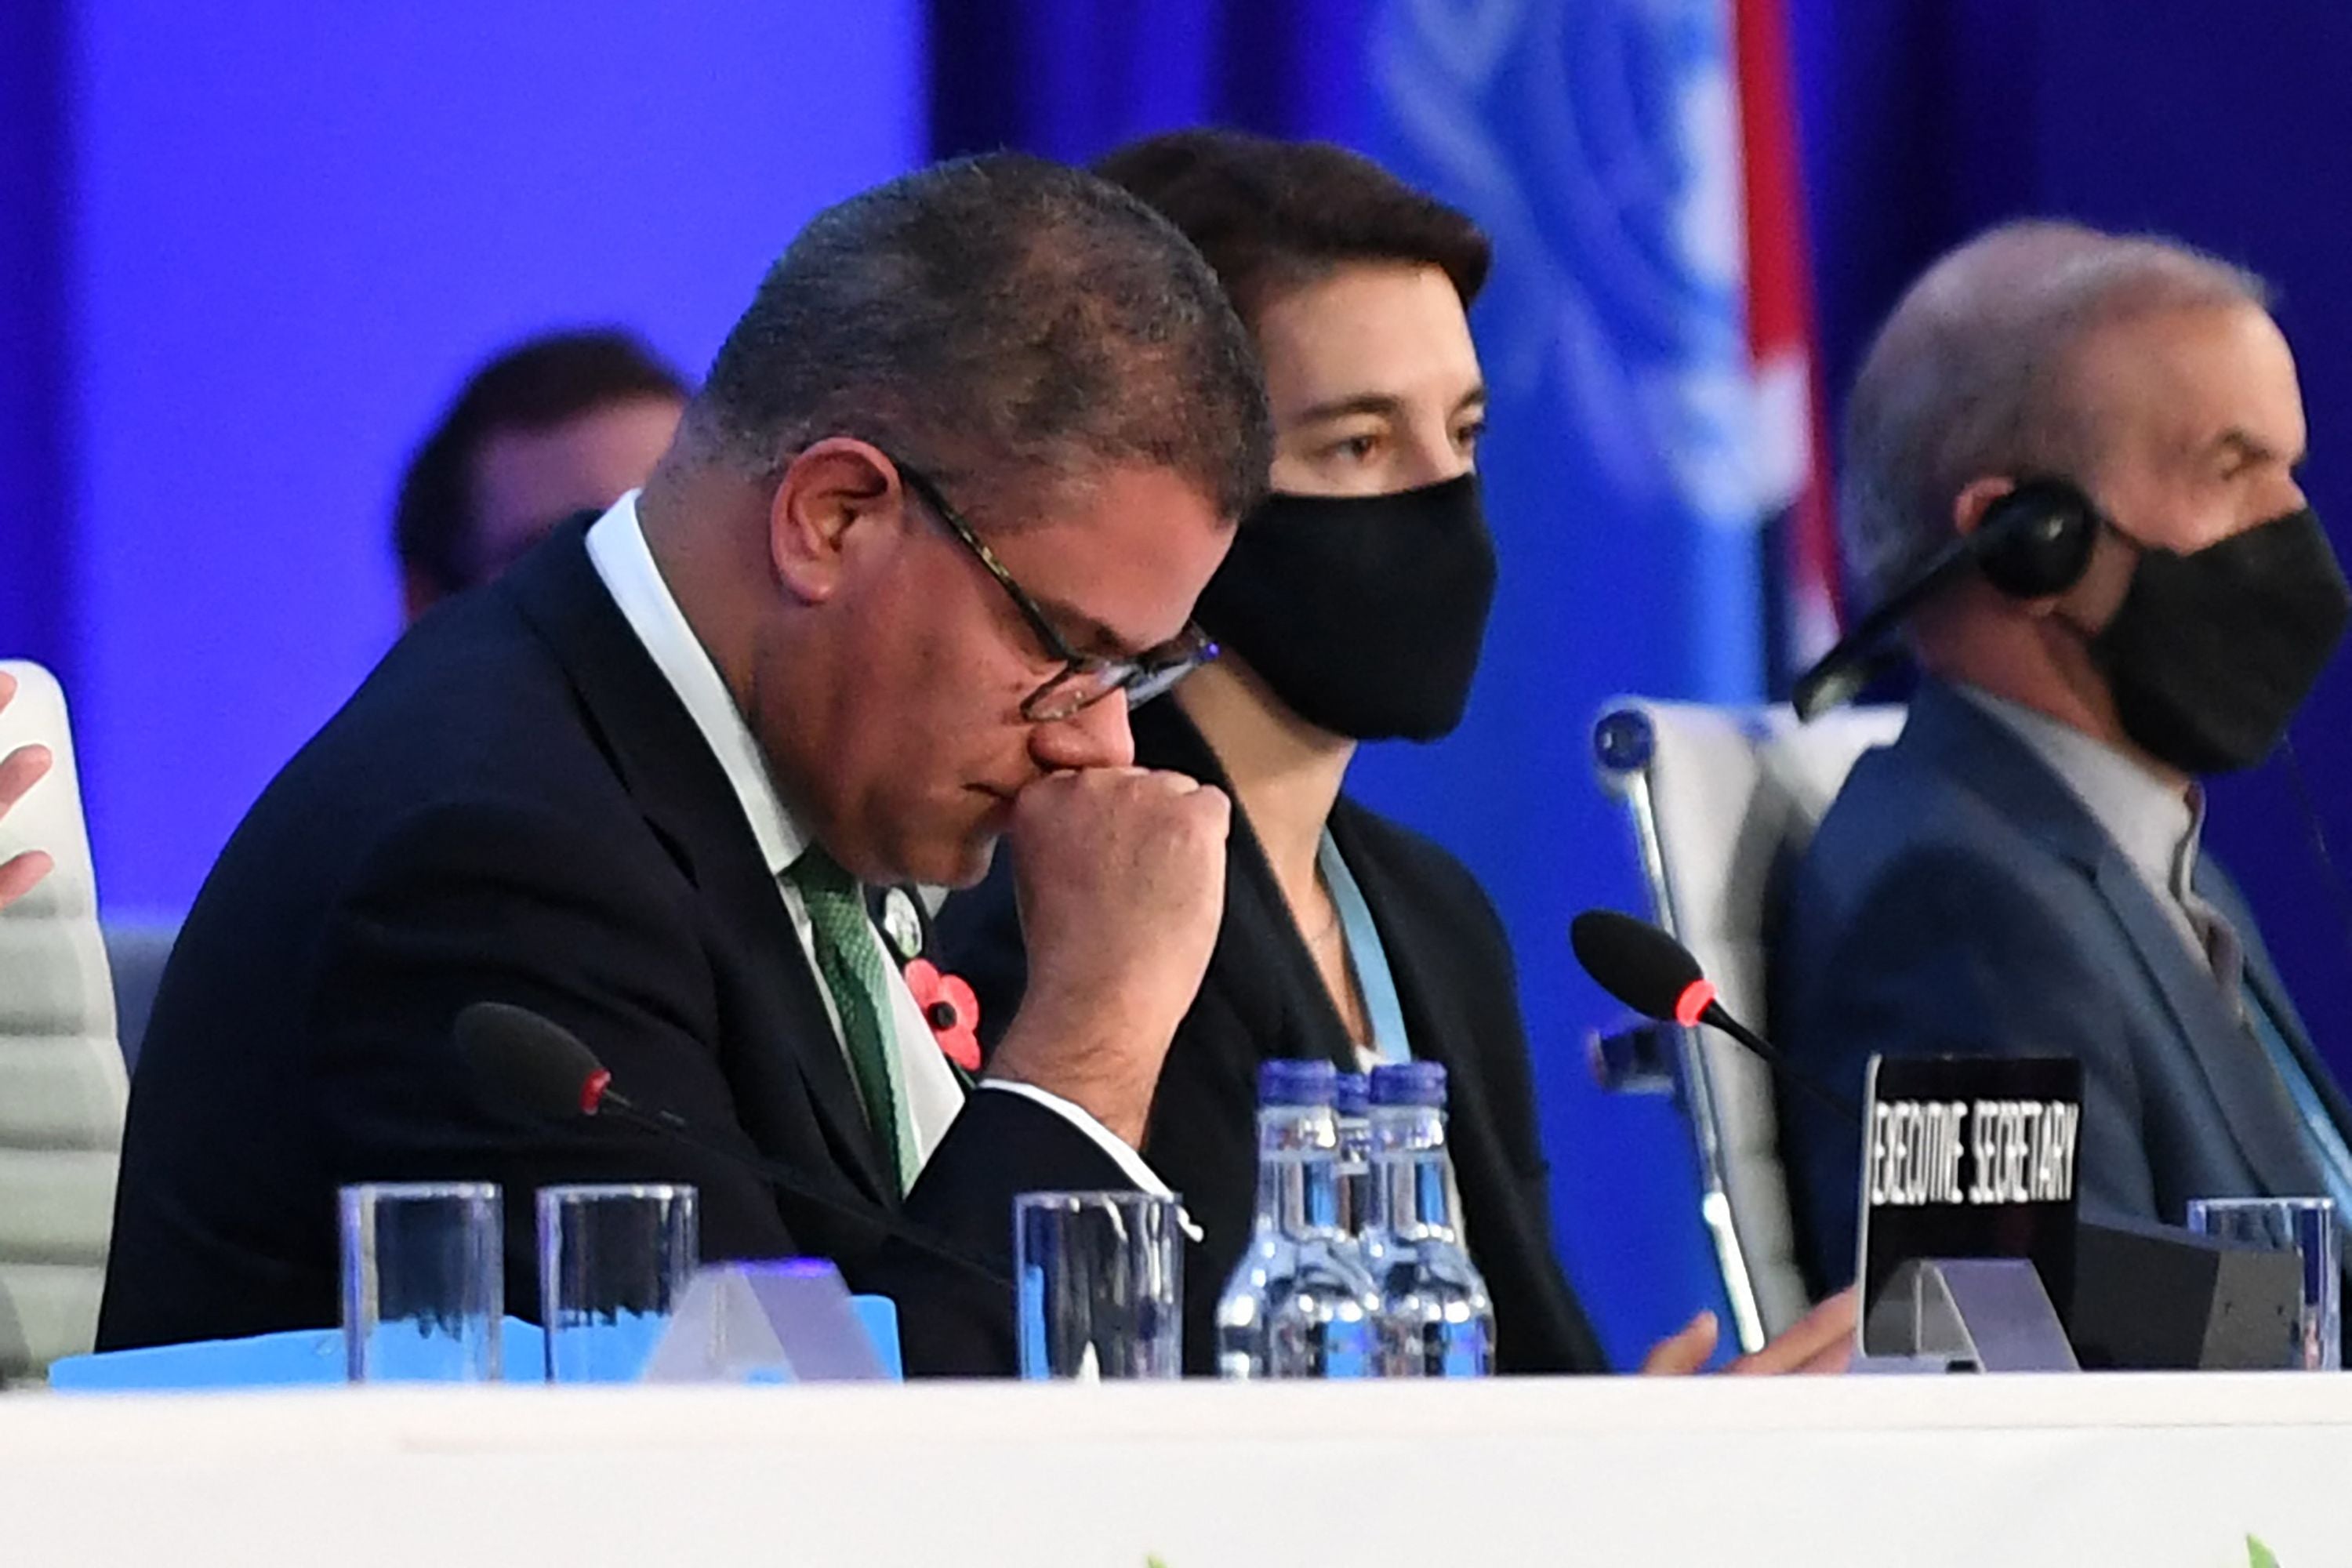 Sharma reacts as he makes his concluding remarks during Cop26 in Glasgow